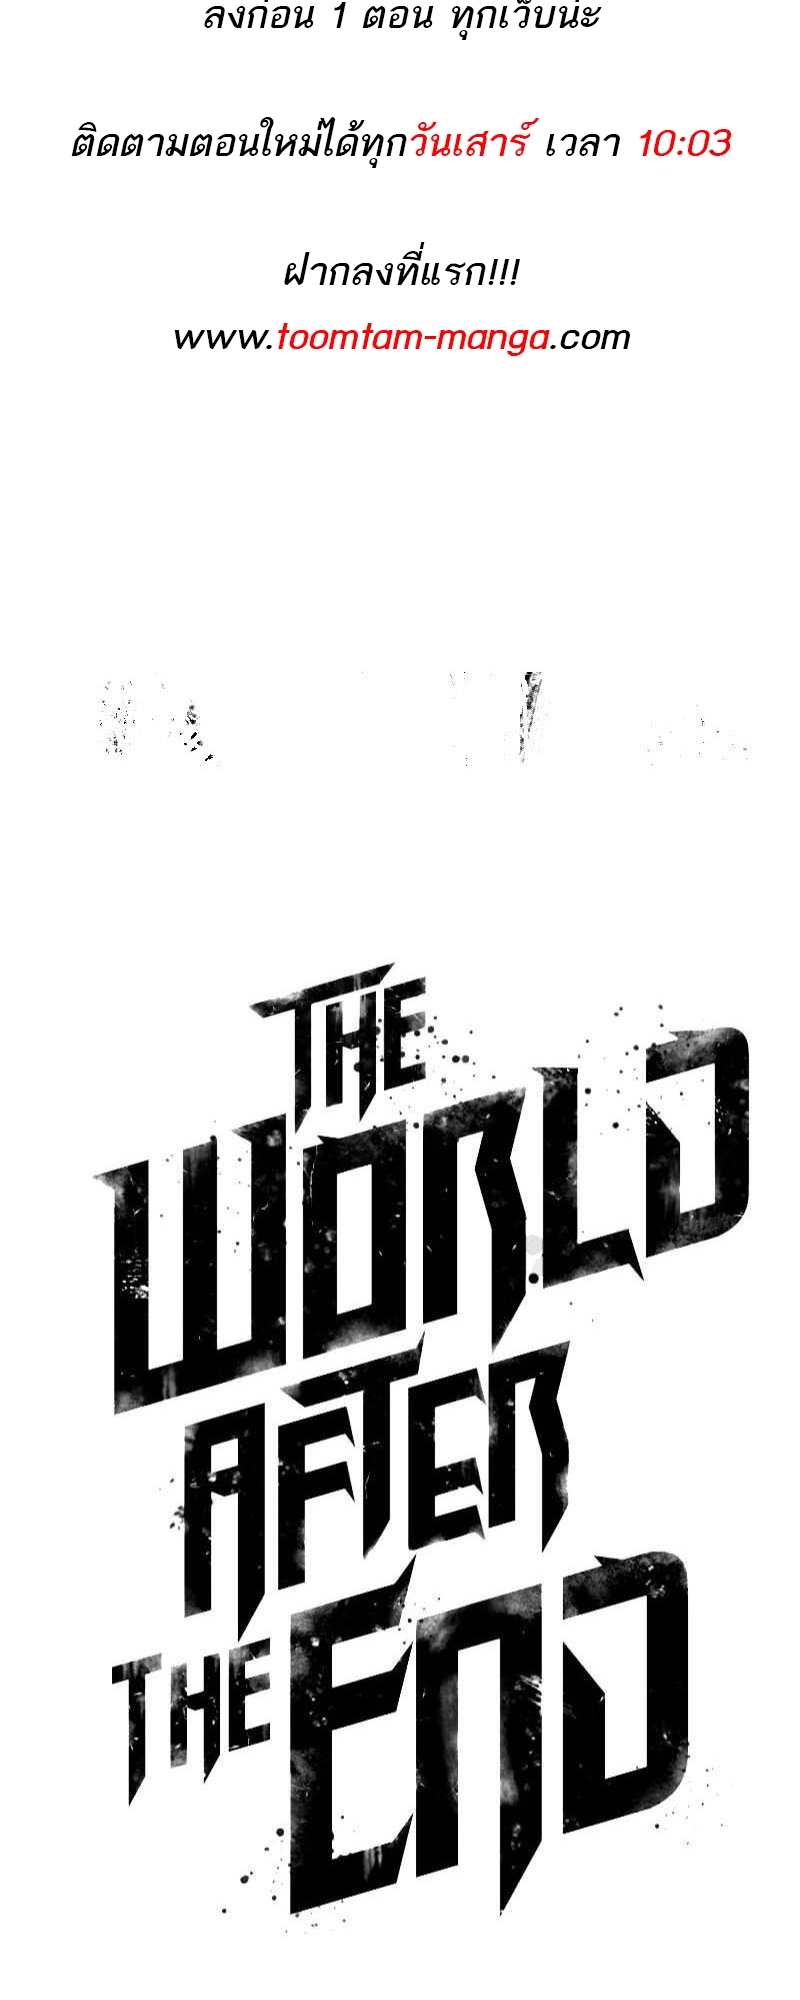 The world after the End 135 13 07 25670094